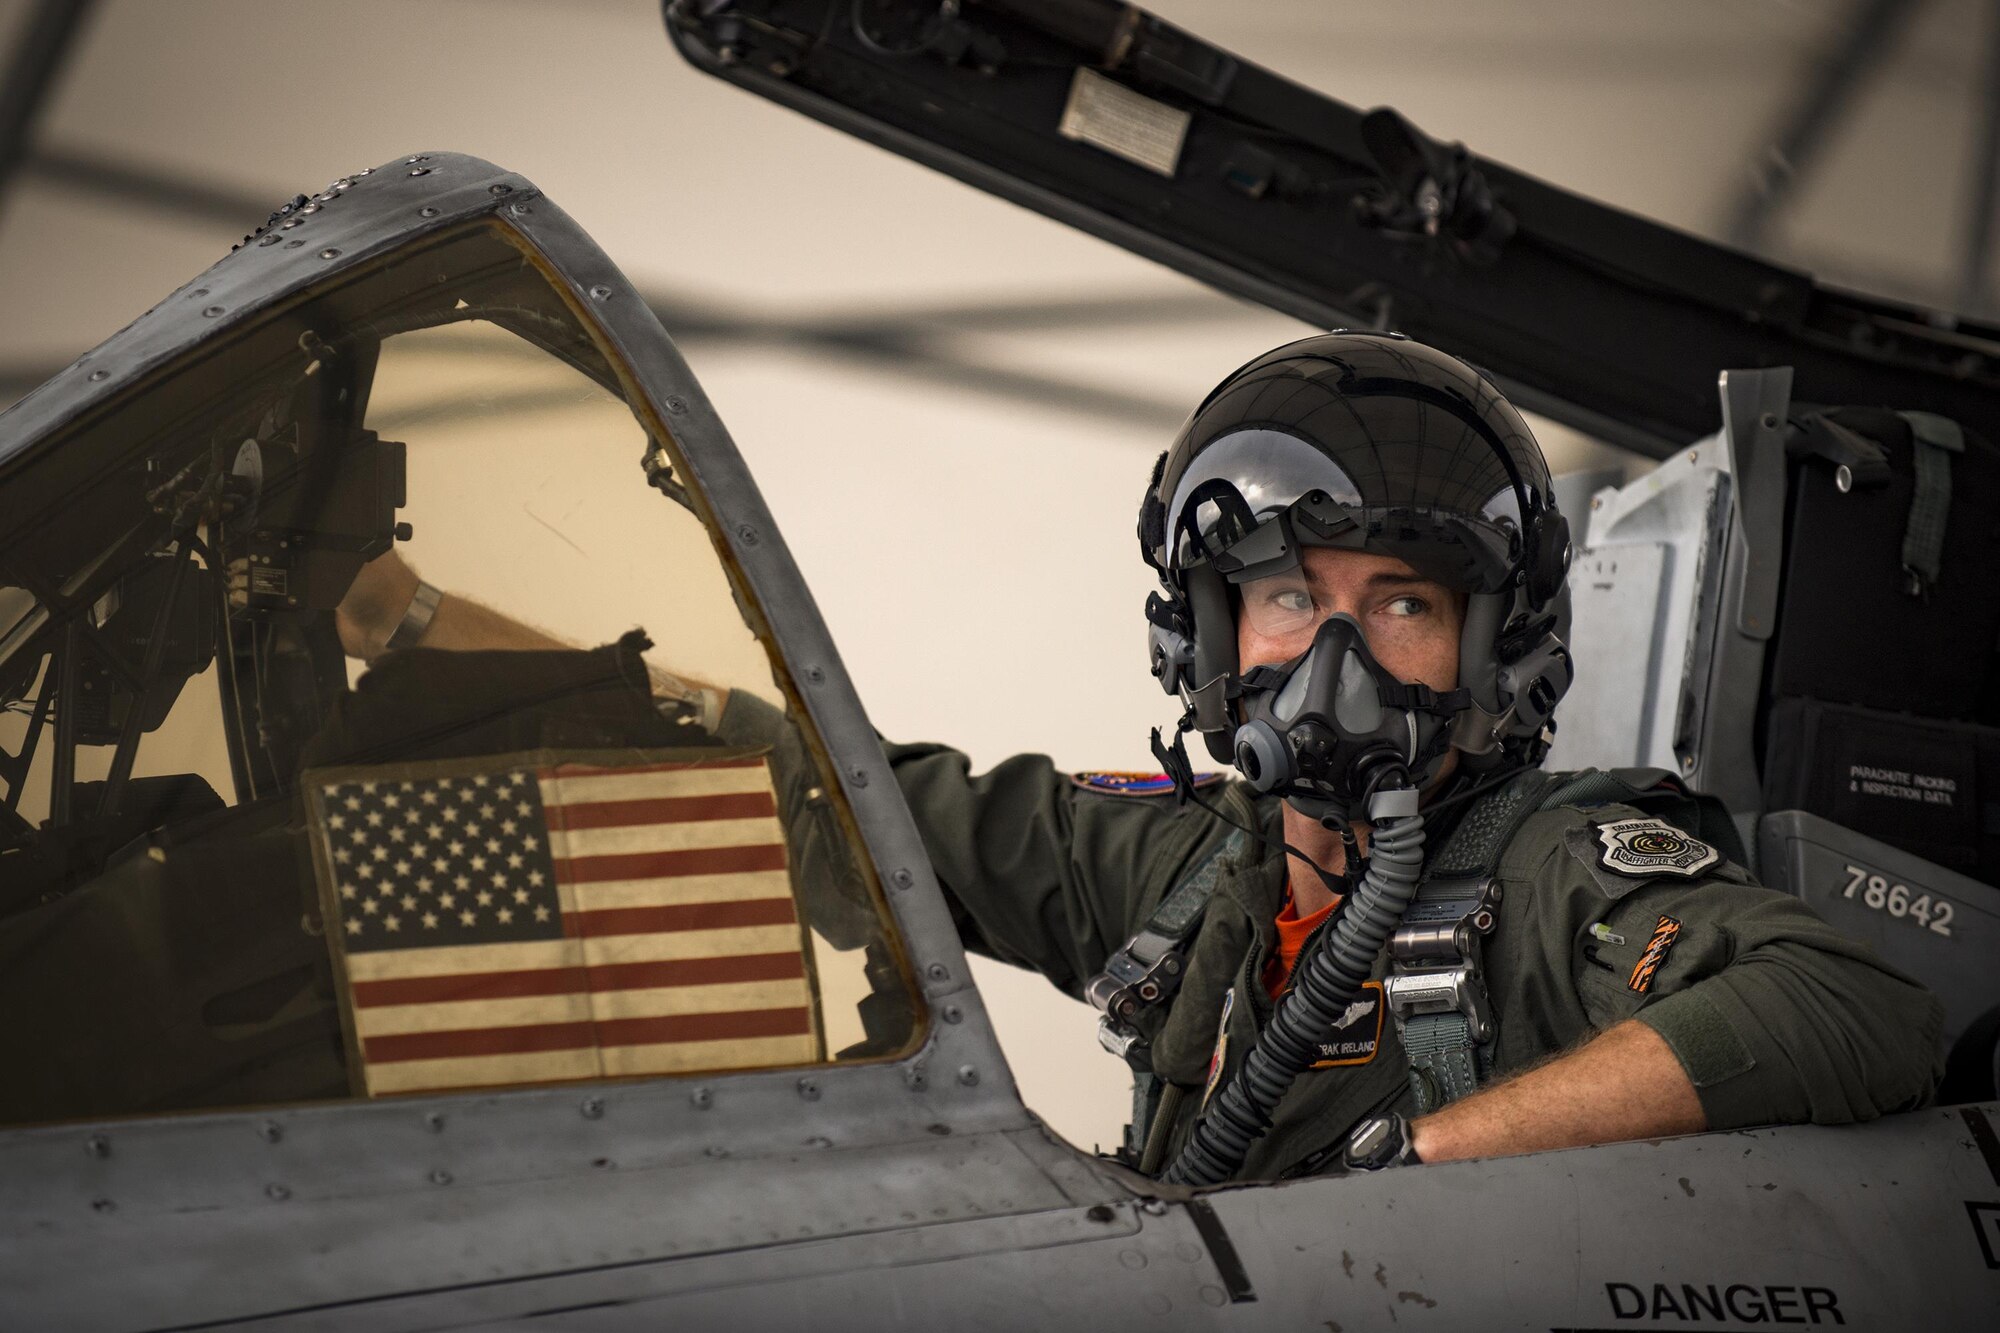 Lt. Col. Dustin Ireland, 23d Operations Support Squadron commander and A-10C Thunderbolt II pilot, prepares for takeoff, April 28, 2017 at Moody Air Force Base. The 75th FS departed for Combat Hammer, an air-to-ground exercise hosted at Hill Air Force Base, Utah. The exercise is designed to collect and analyze data on the performance of precision weapons and measure their suitability for use in combat. (U.S. Air Force photo by Andrea Jenkins)  